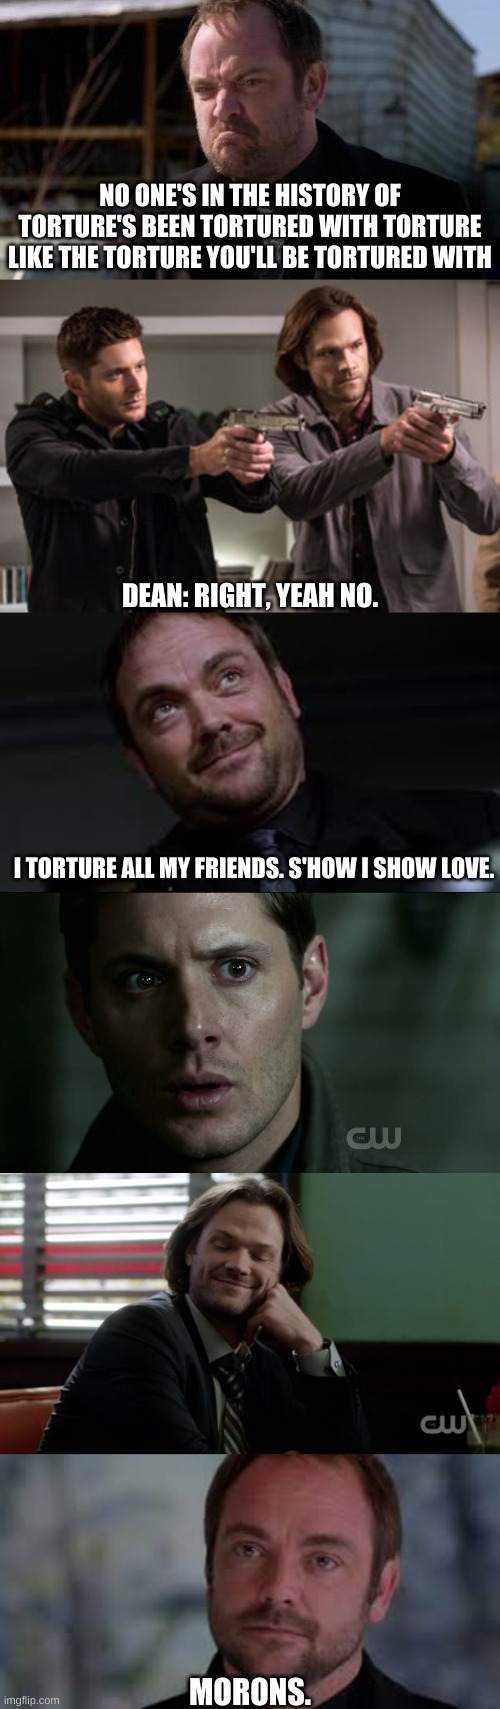 Crowley and the Winchesters | NO ONE'S IN THE HISTORY OF TORTURE'S BEEN TORTURED WITH TORTURE LIKE THE TORTURE YOU'LL BE TORTURED WITH; DEAN: RIGHT, YEAH NO. I TORTURE ALL MY FRIENDS. S'HOW I SHOW LOVE. MORONS. | image tagged in crowley,sam winchester,dean winchester | made w/ Imgflip meme maker